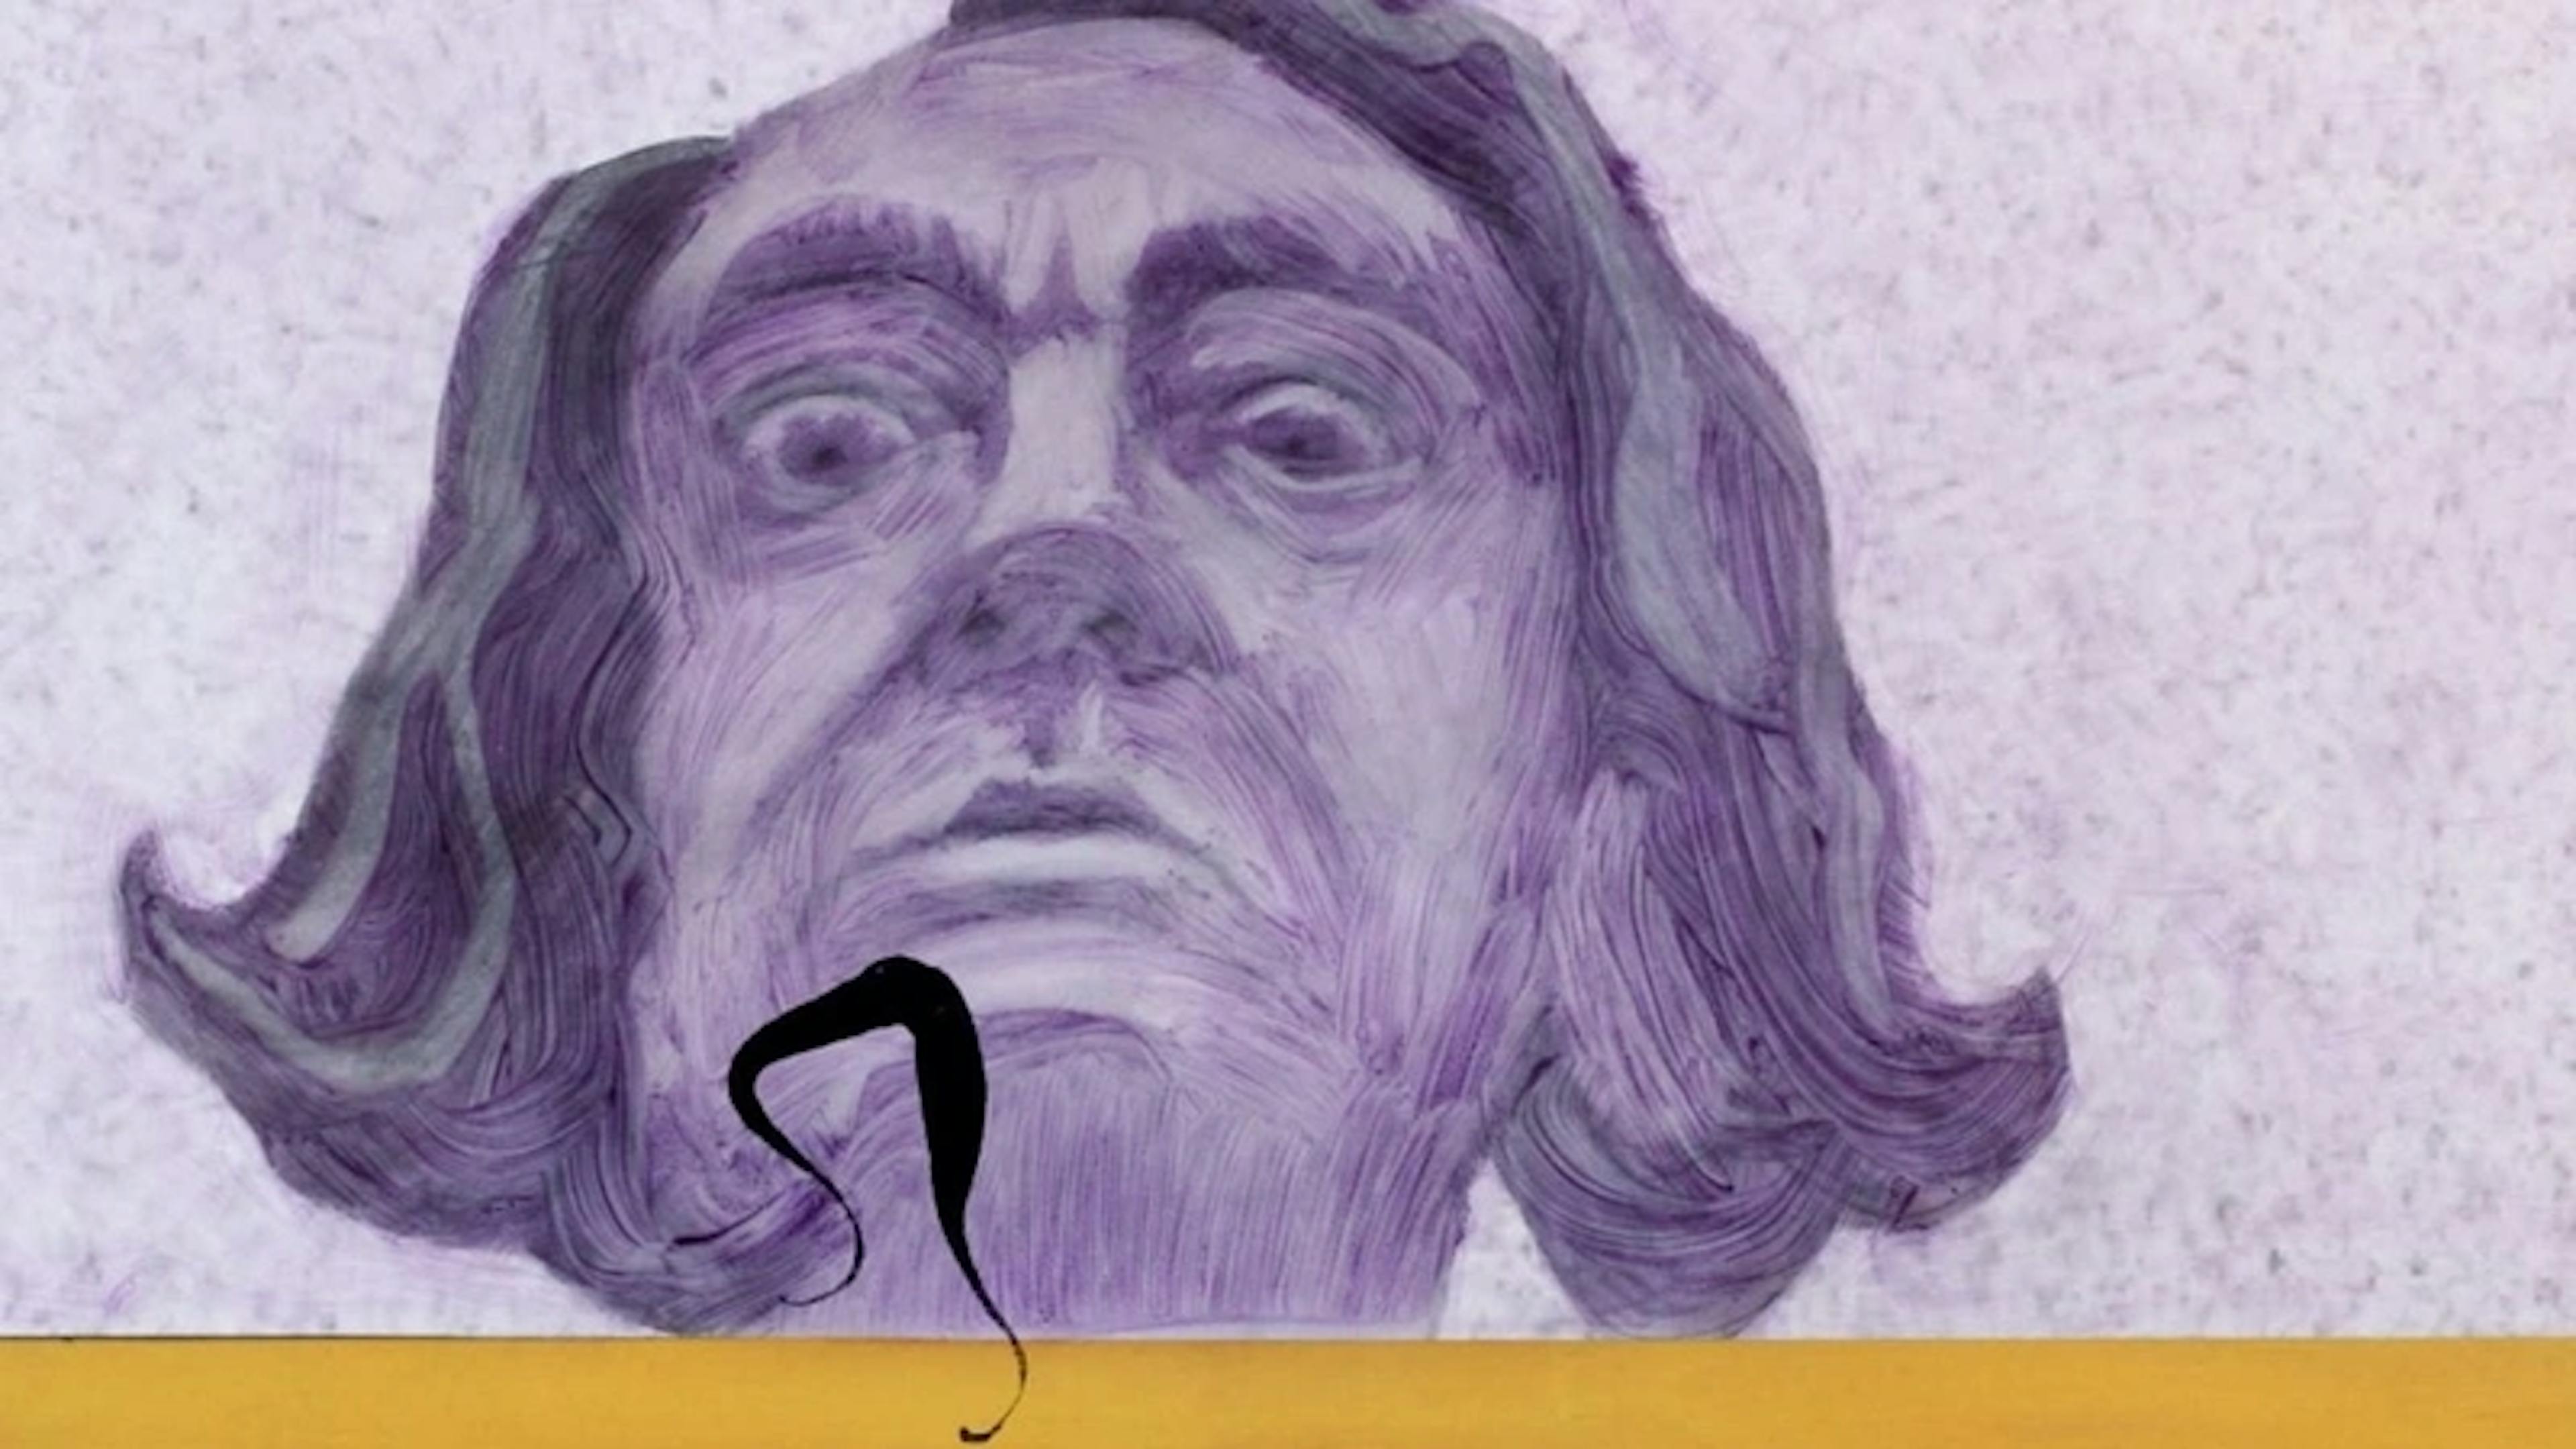 screenshot from "Stache and the Inner Walk" by Joanne Fisher (2020). Salvador Dali looks unimpressed upon his moustache walking on a yellow surface